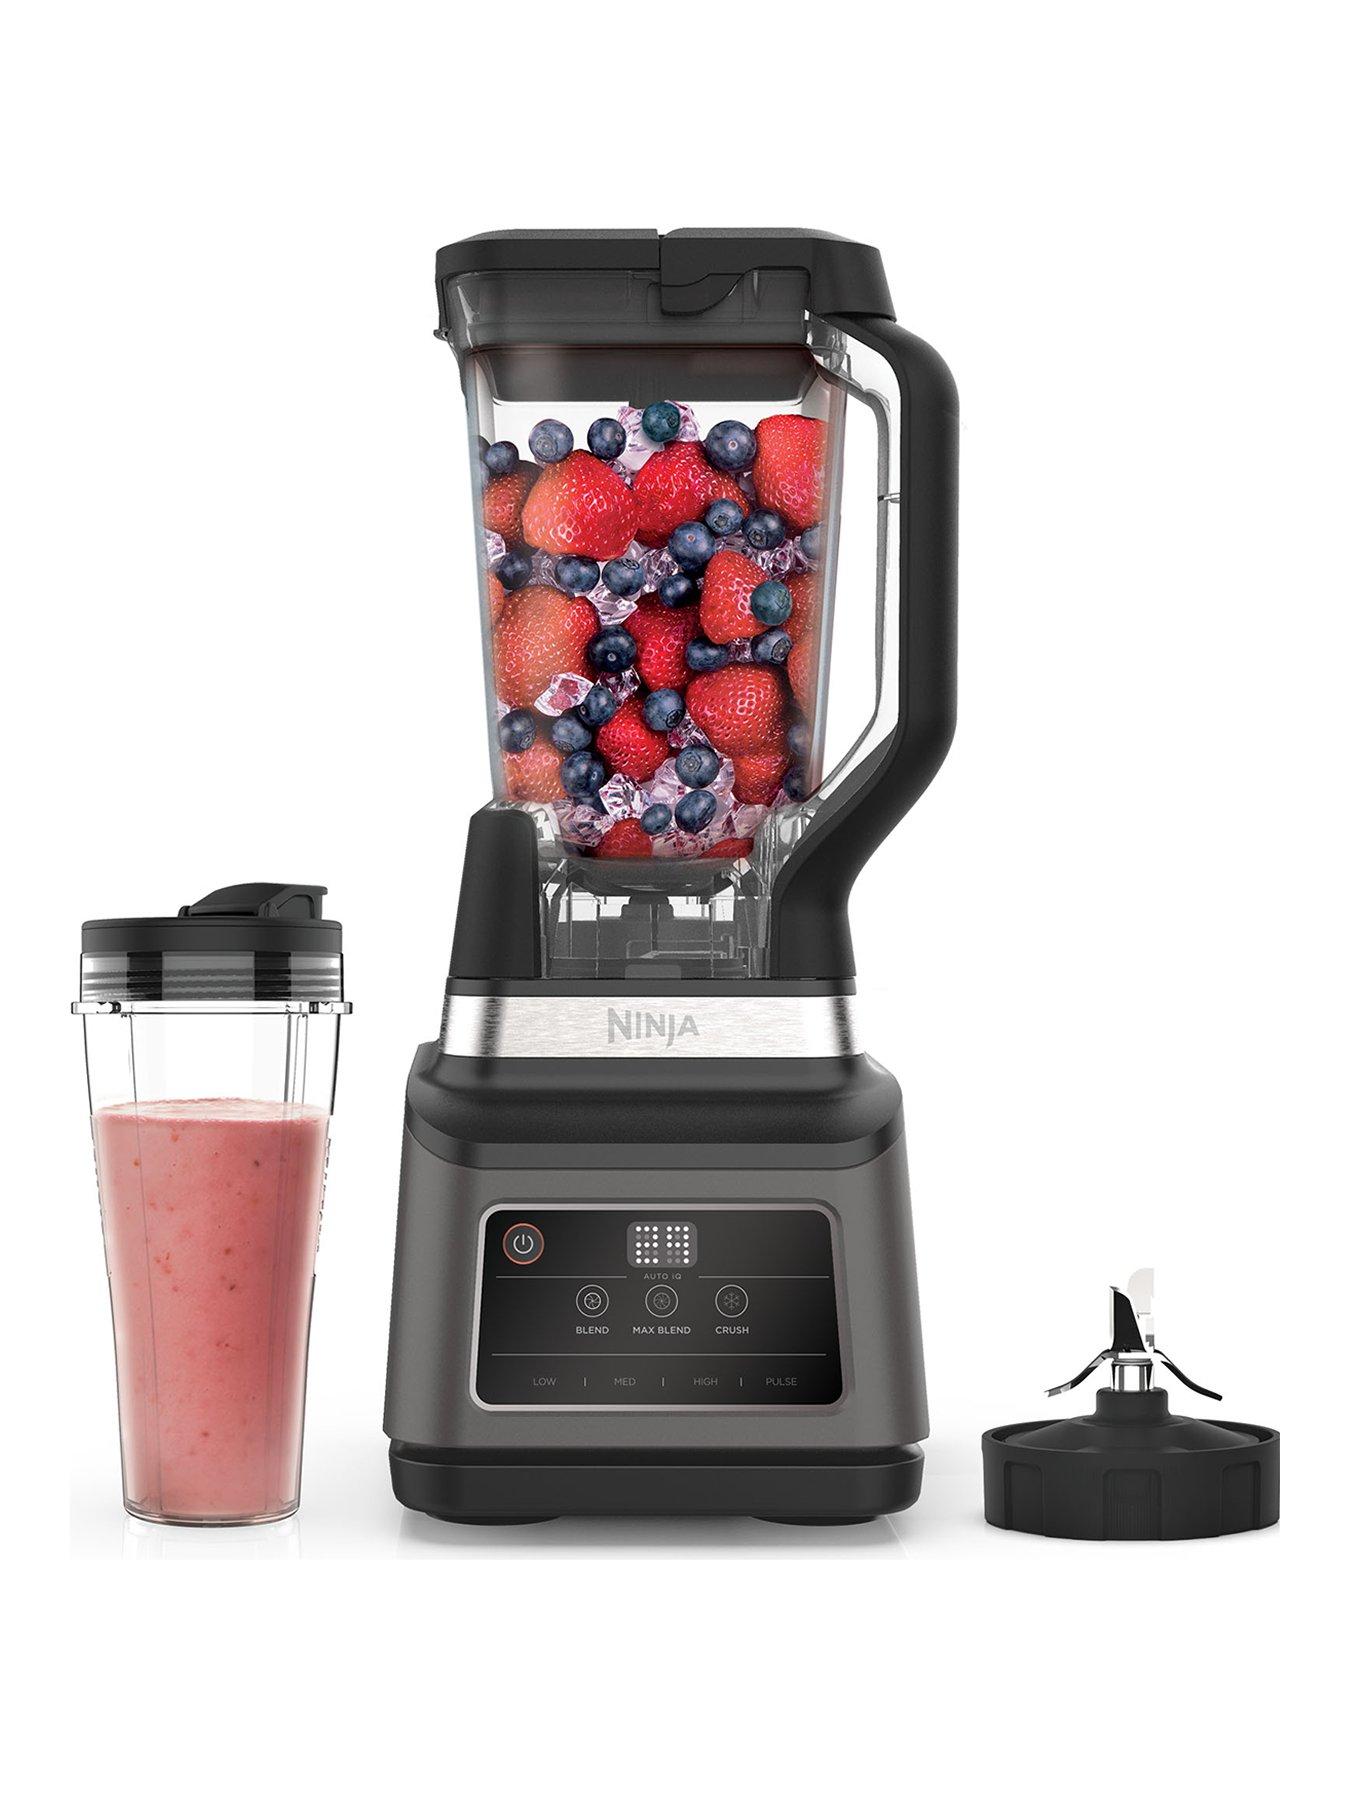 Ninja 3-in-1 food processor with Auto IQ review - Review